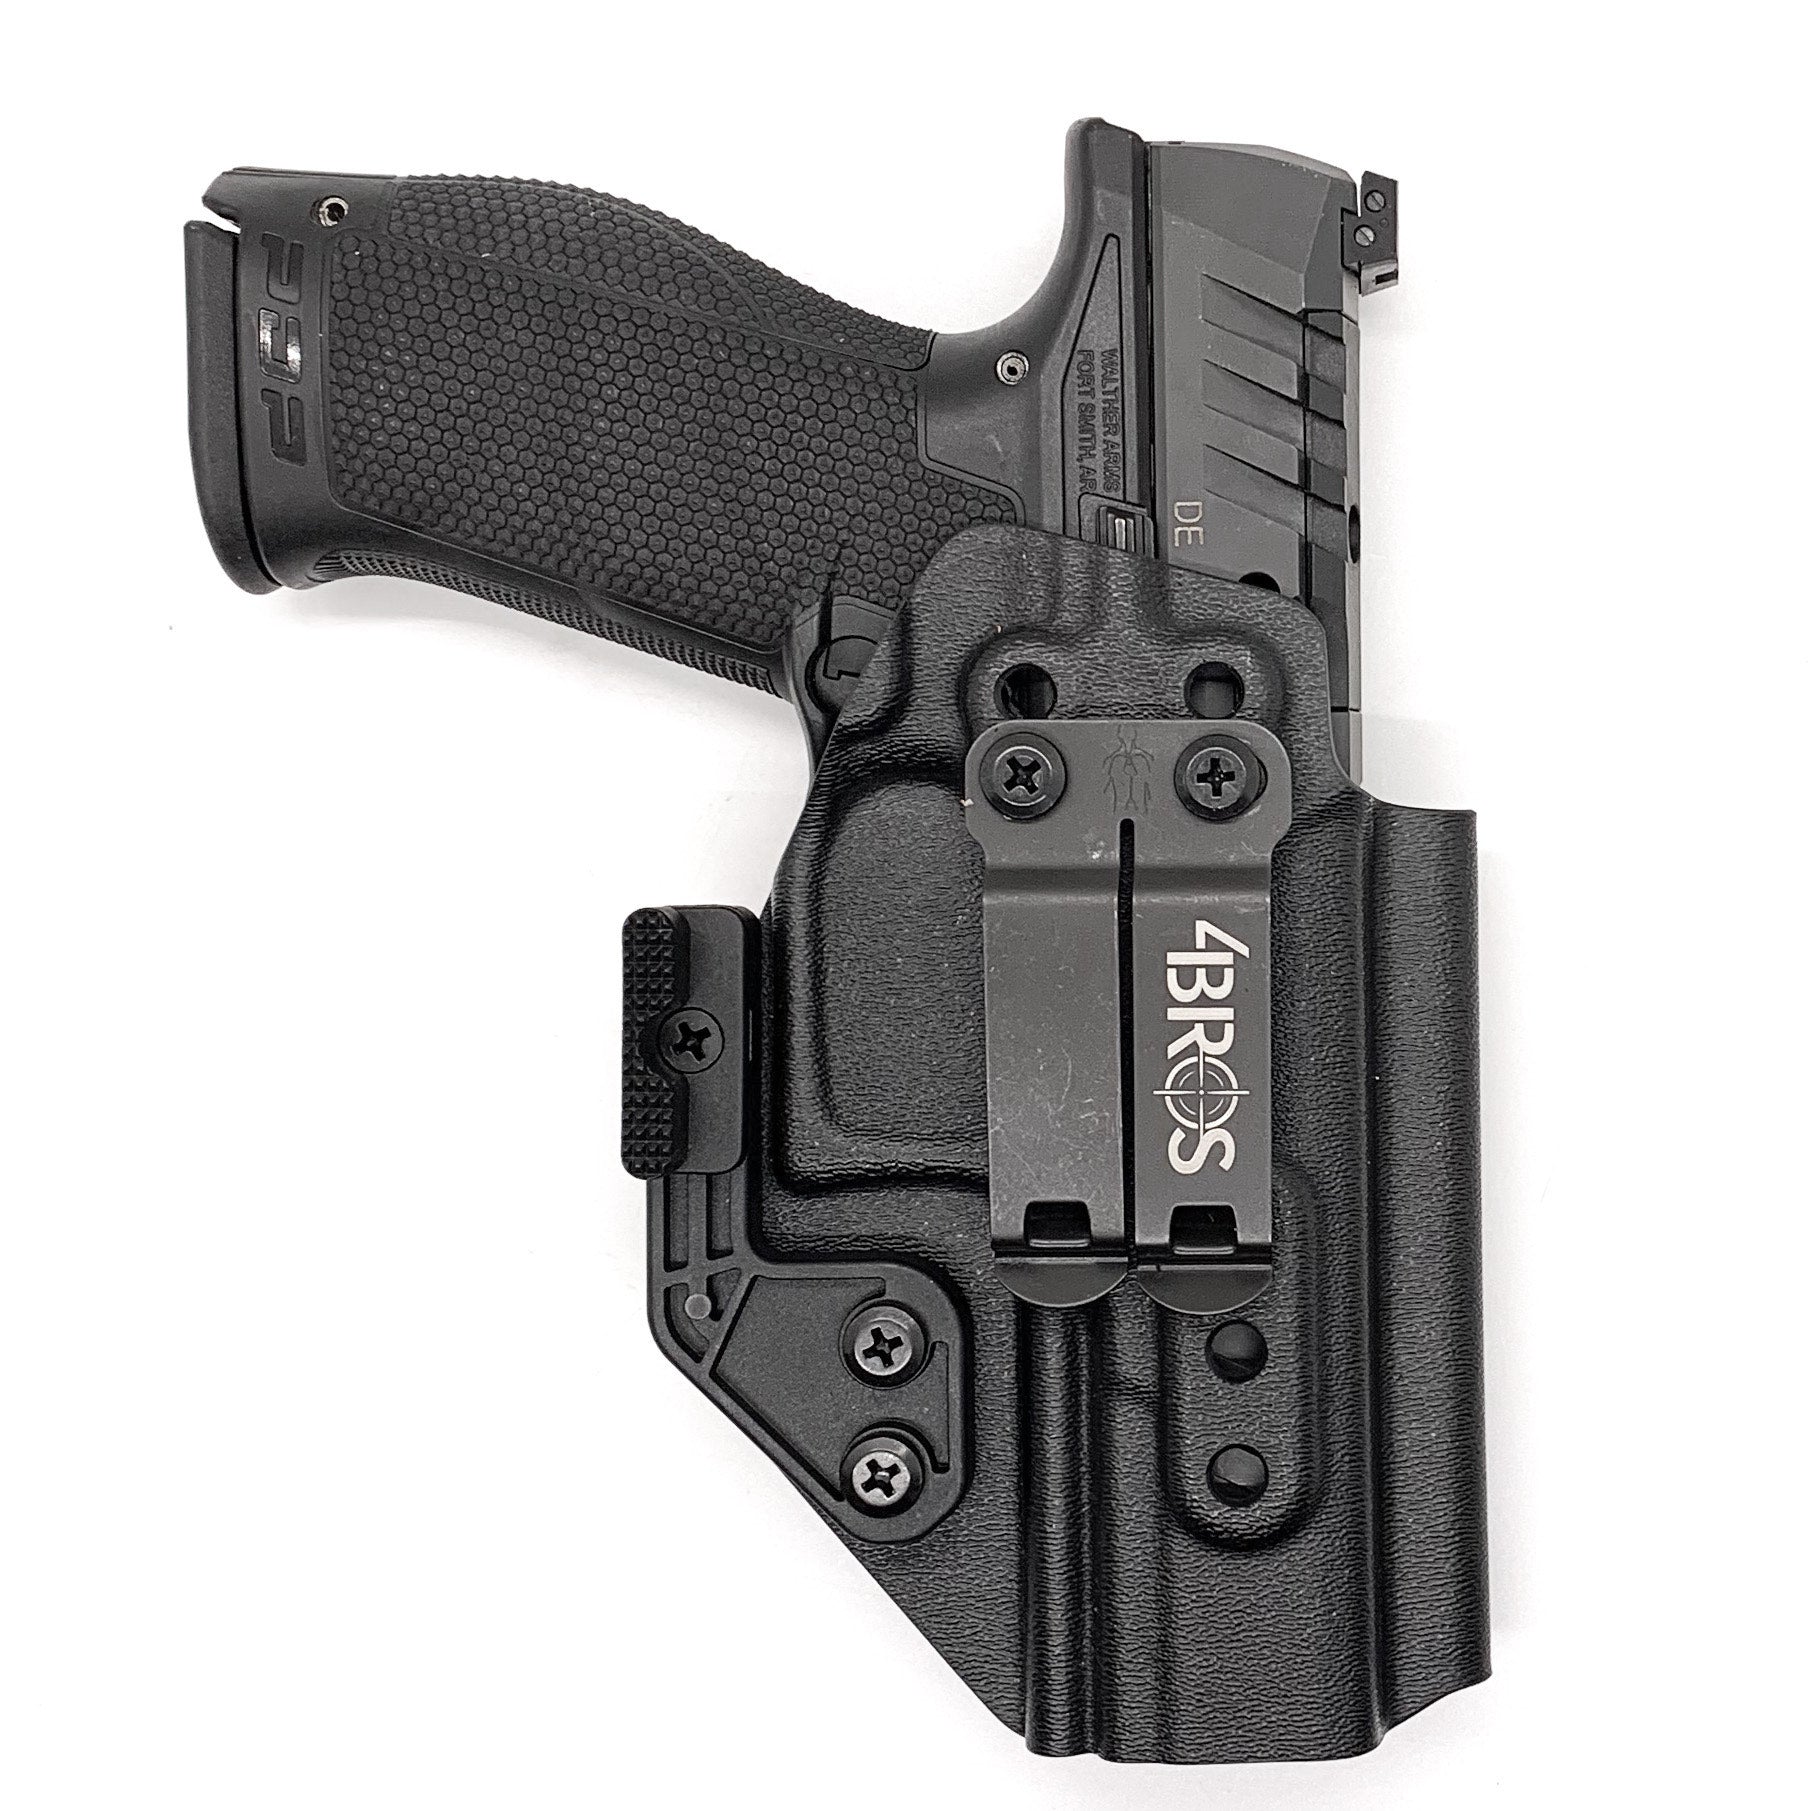 Inside Waistband IWB Holster designed to fit the Walther PDP Full Size 4" pistol. Holster profile is cut to allow red dot sights to be mounted on the pistol.  This holster will fit the Full Size 4.5", Full Size 4" & Compact. Full sweat guard, adjustable retention and open muzzle for threaded barrels and compensators.